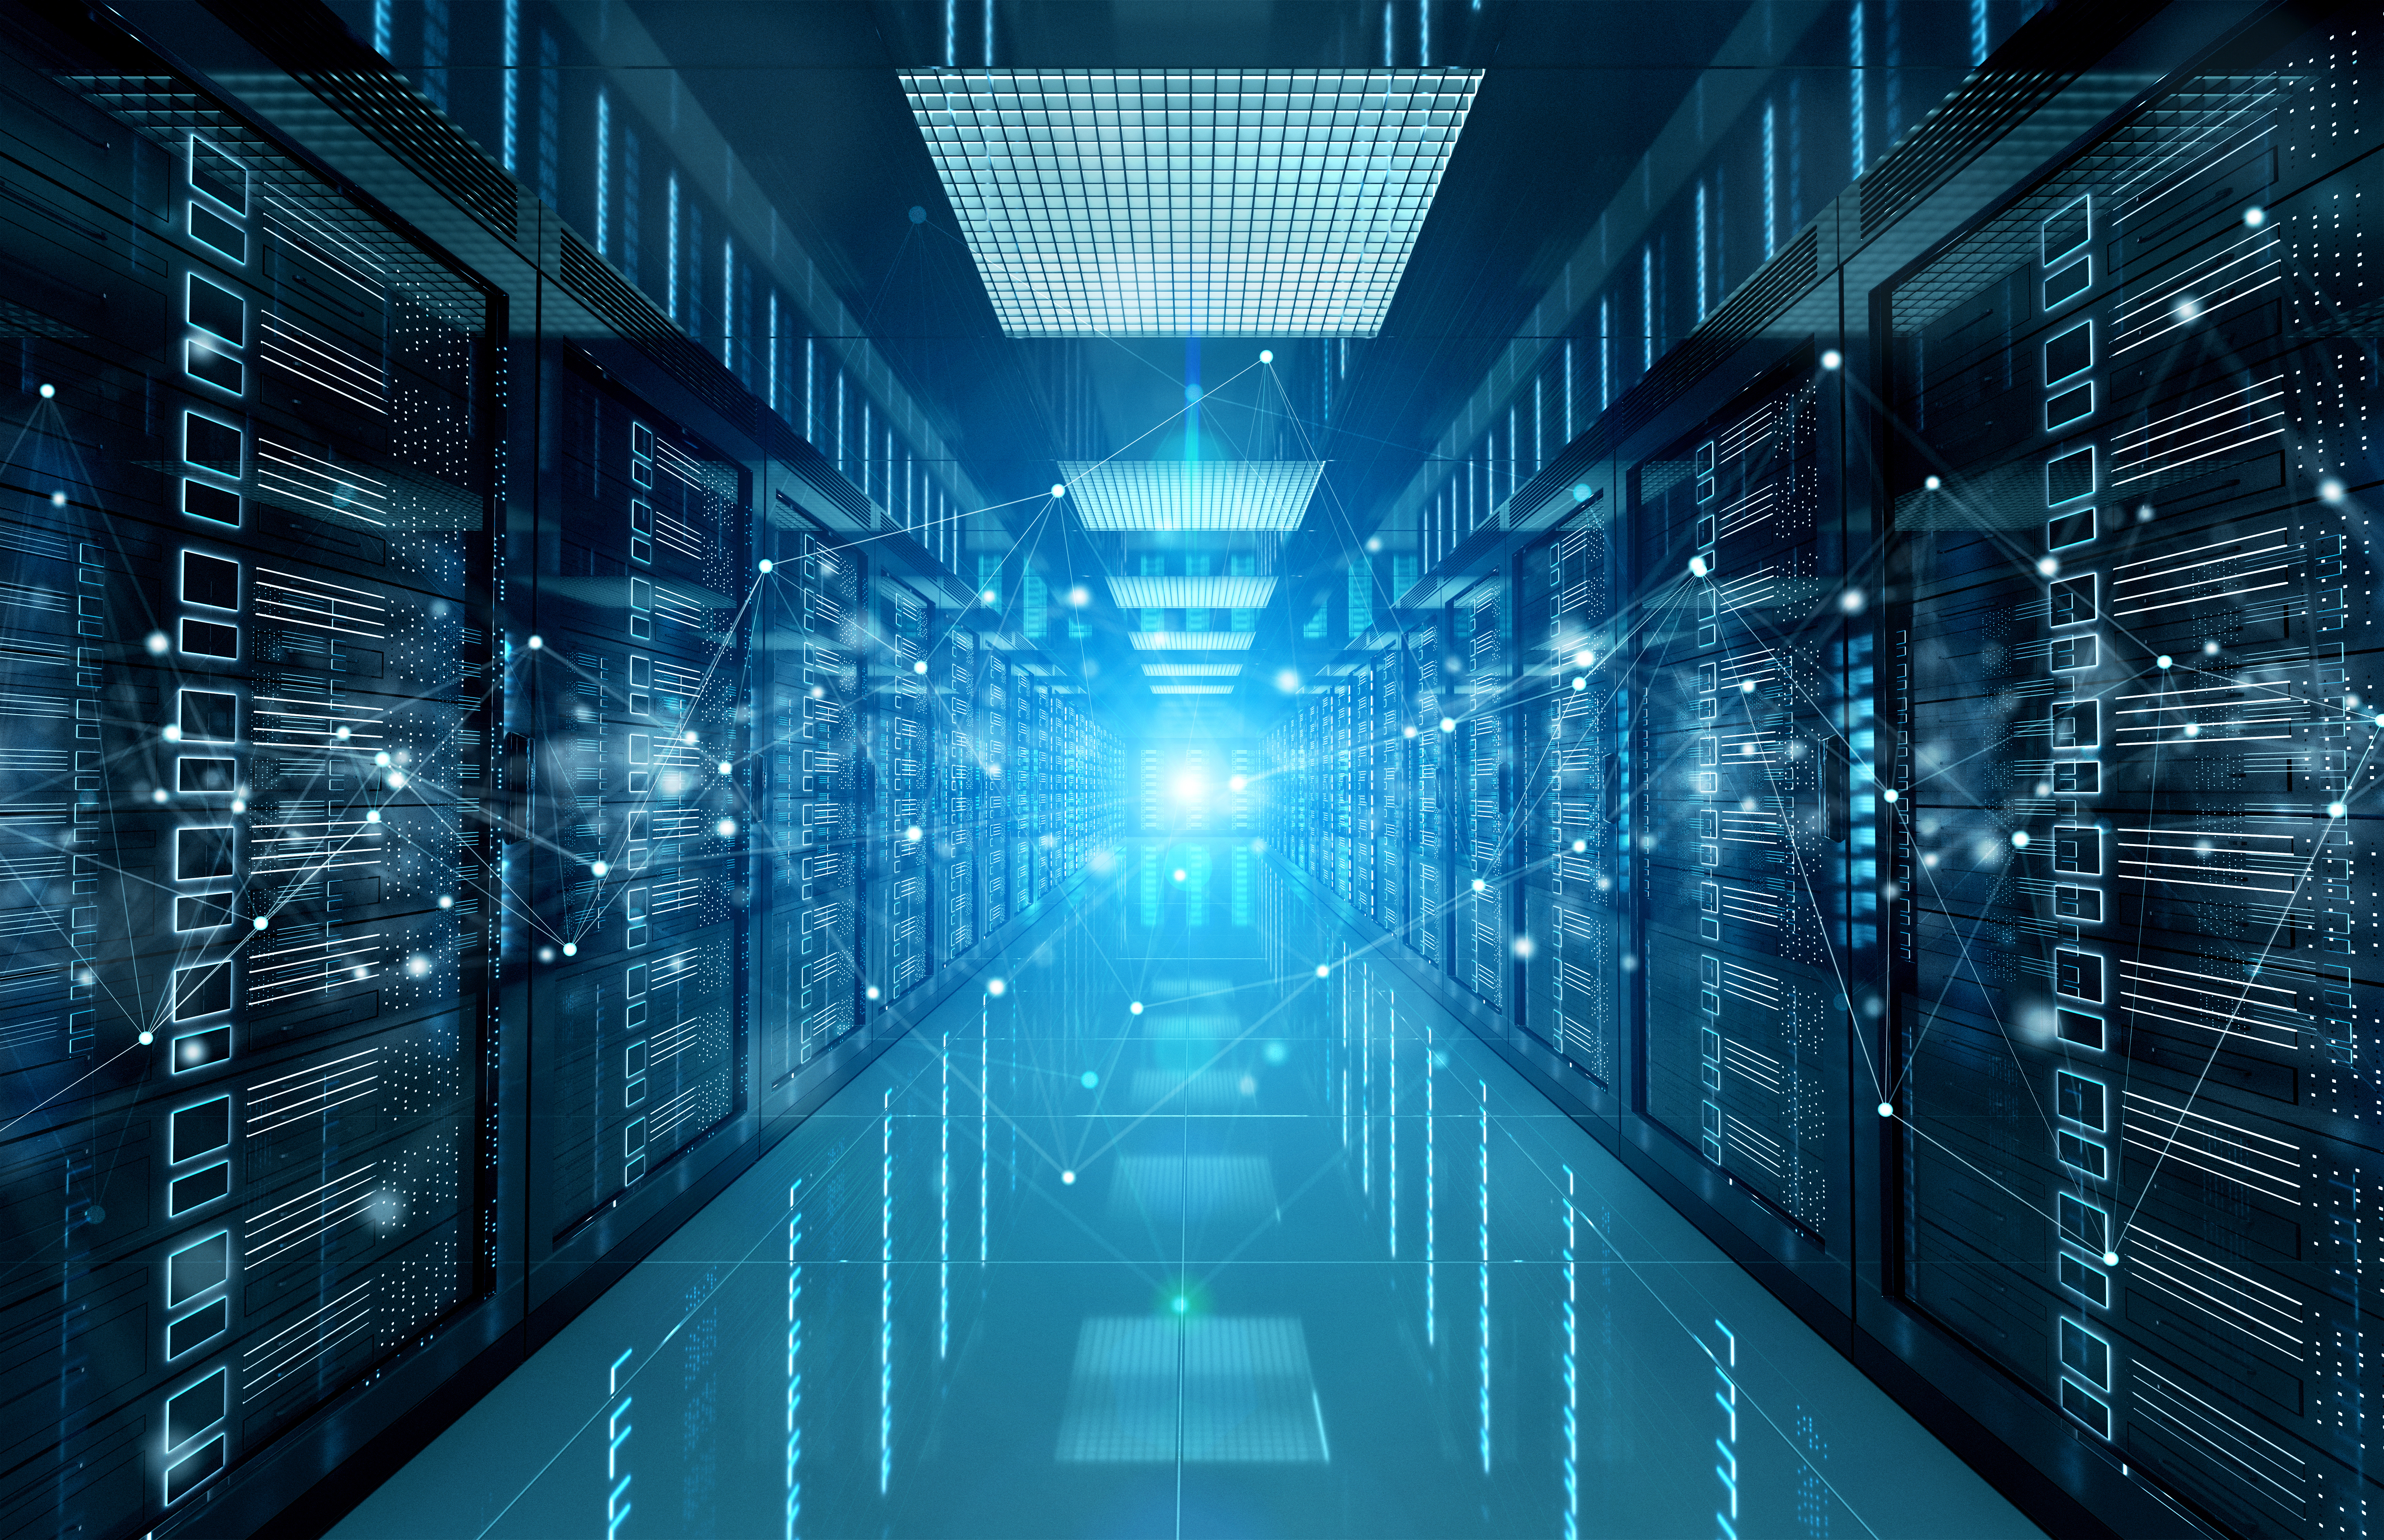 A stylised image of a data room or storage facility. 